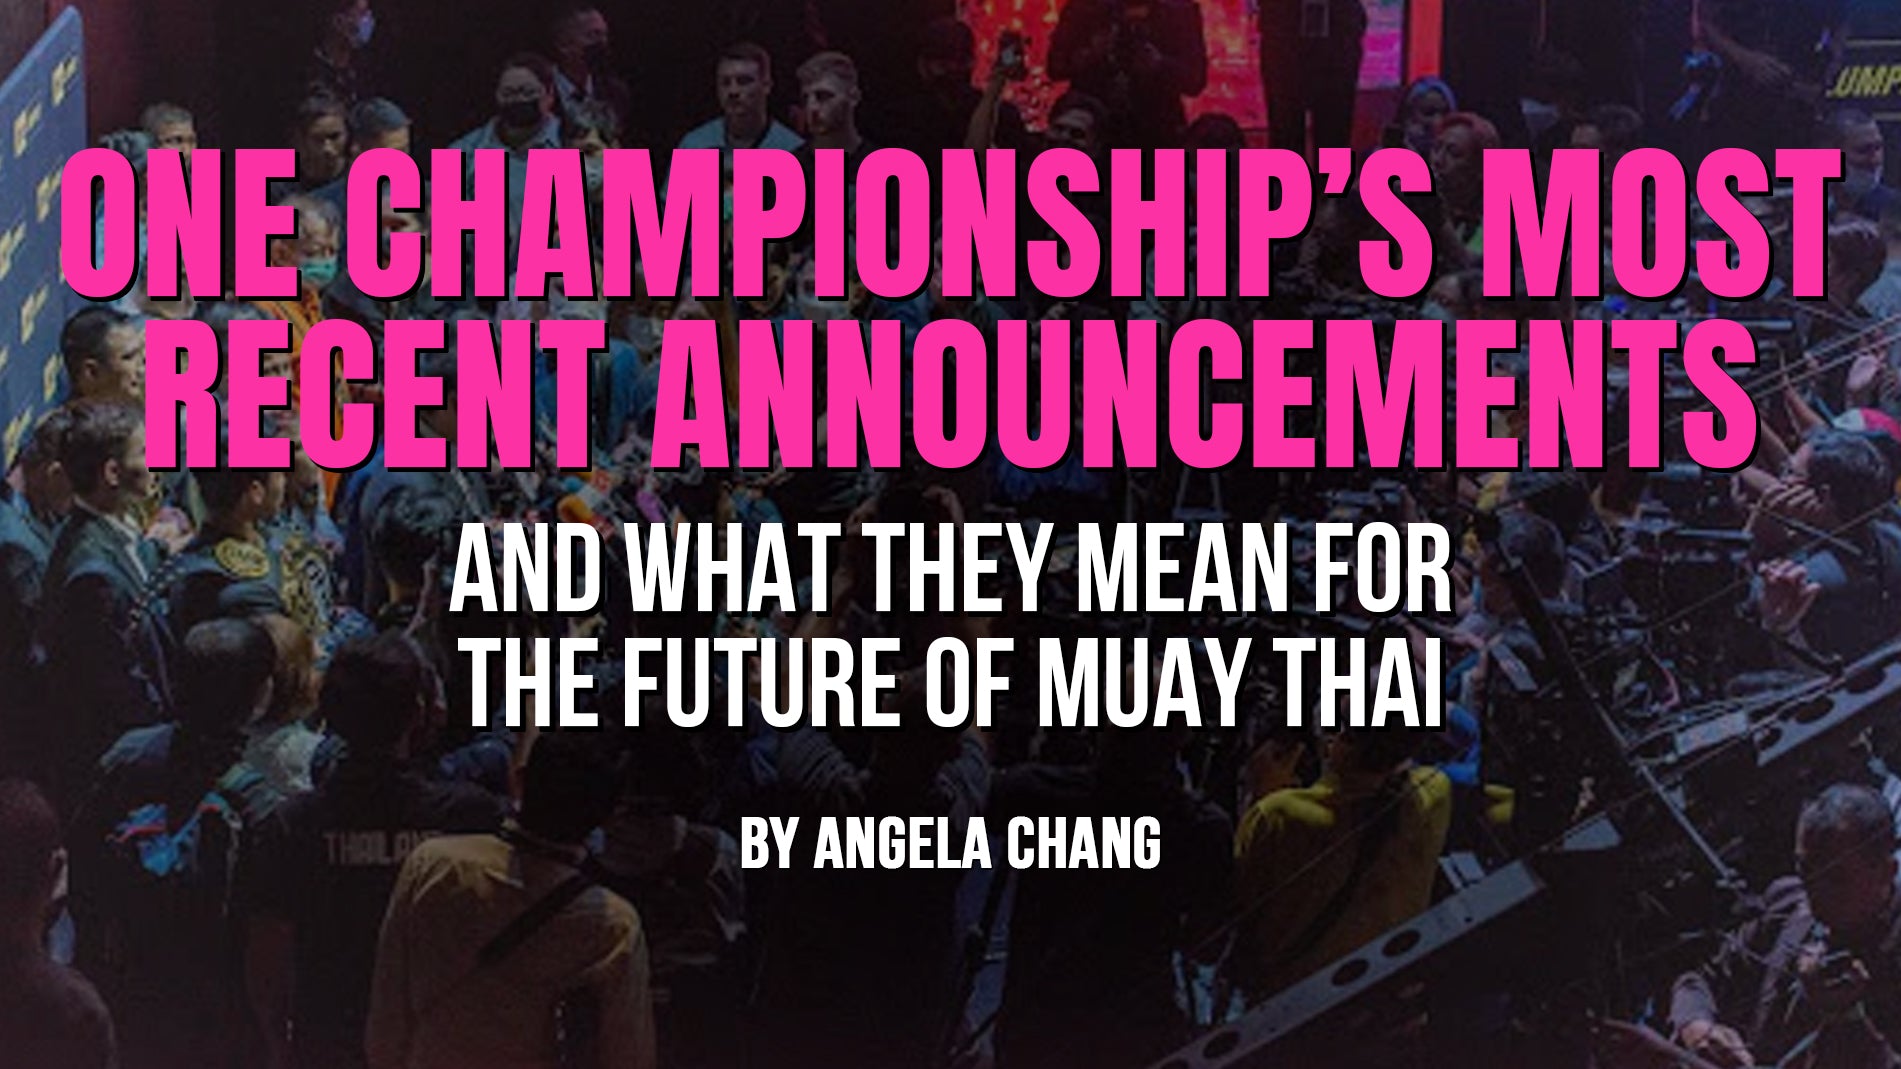 ONE Championship’s Most Recent Announcements: What They Are and What They Mean for The Future of Muay Thai